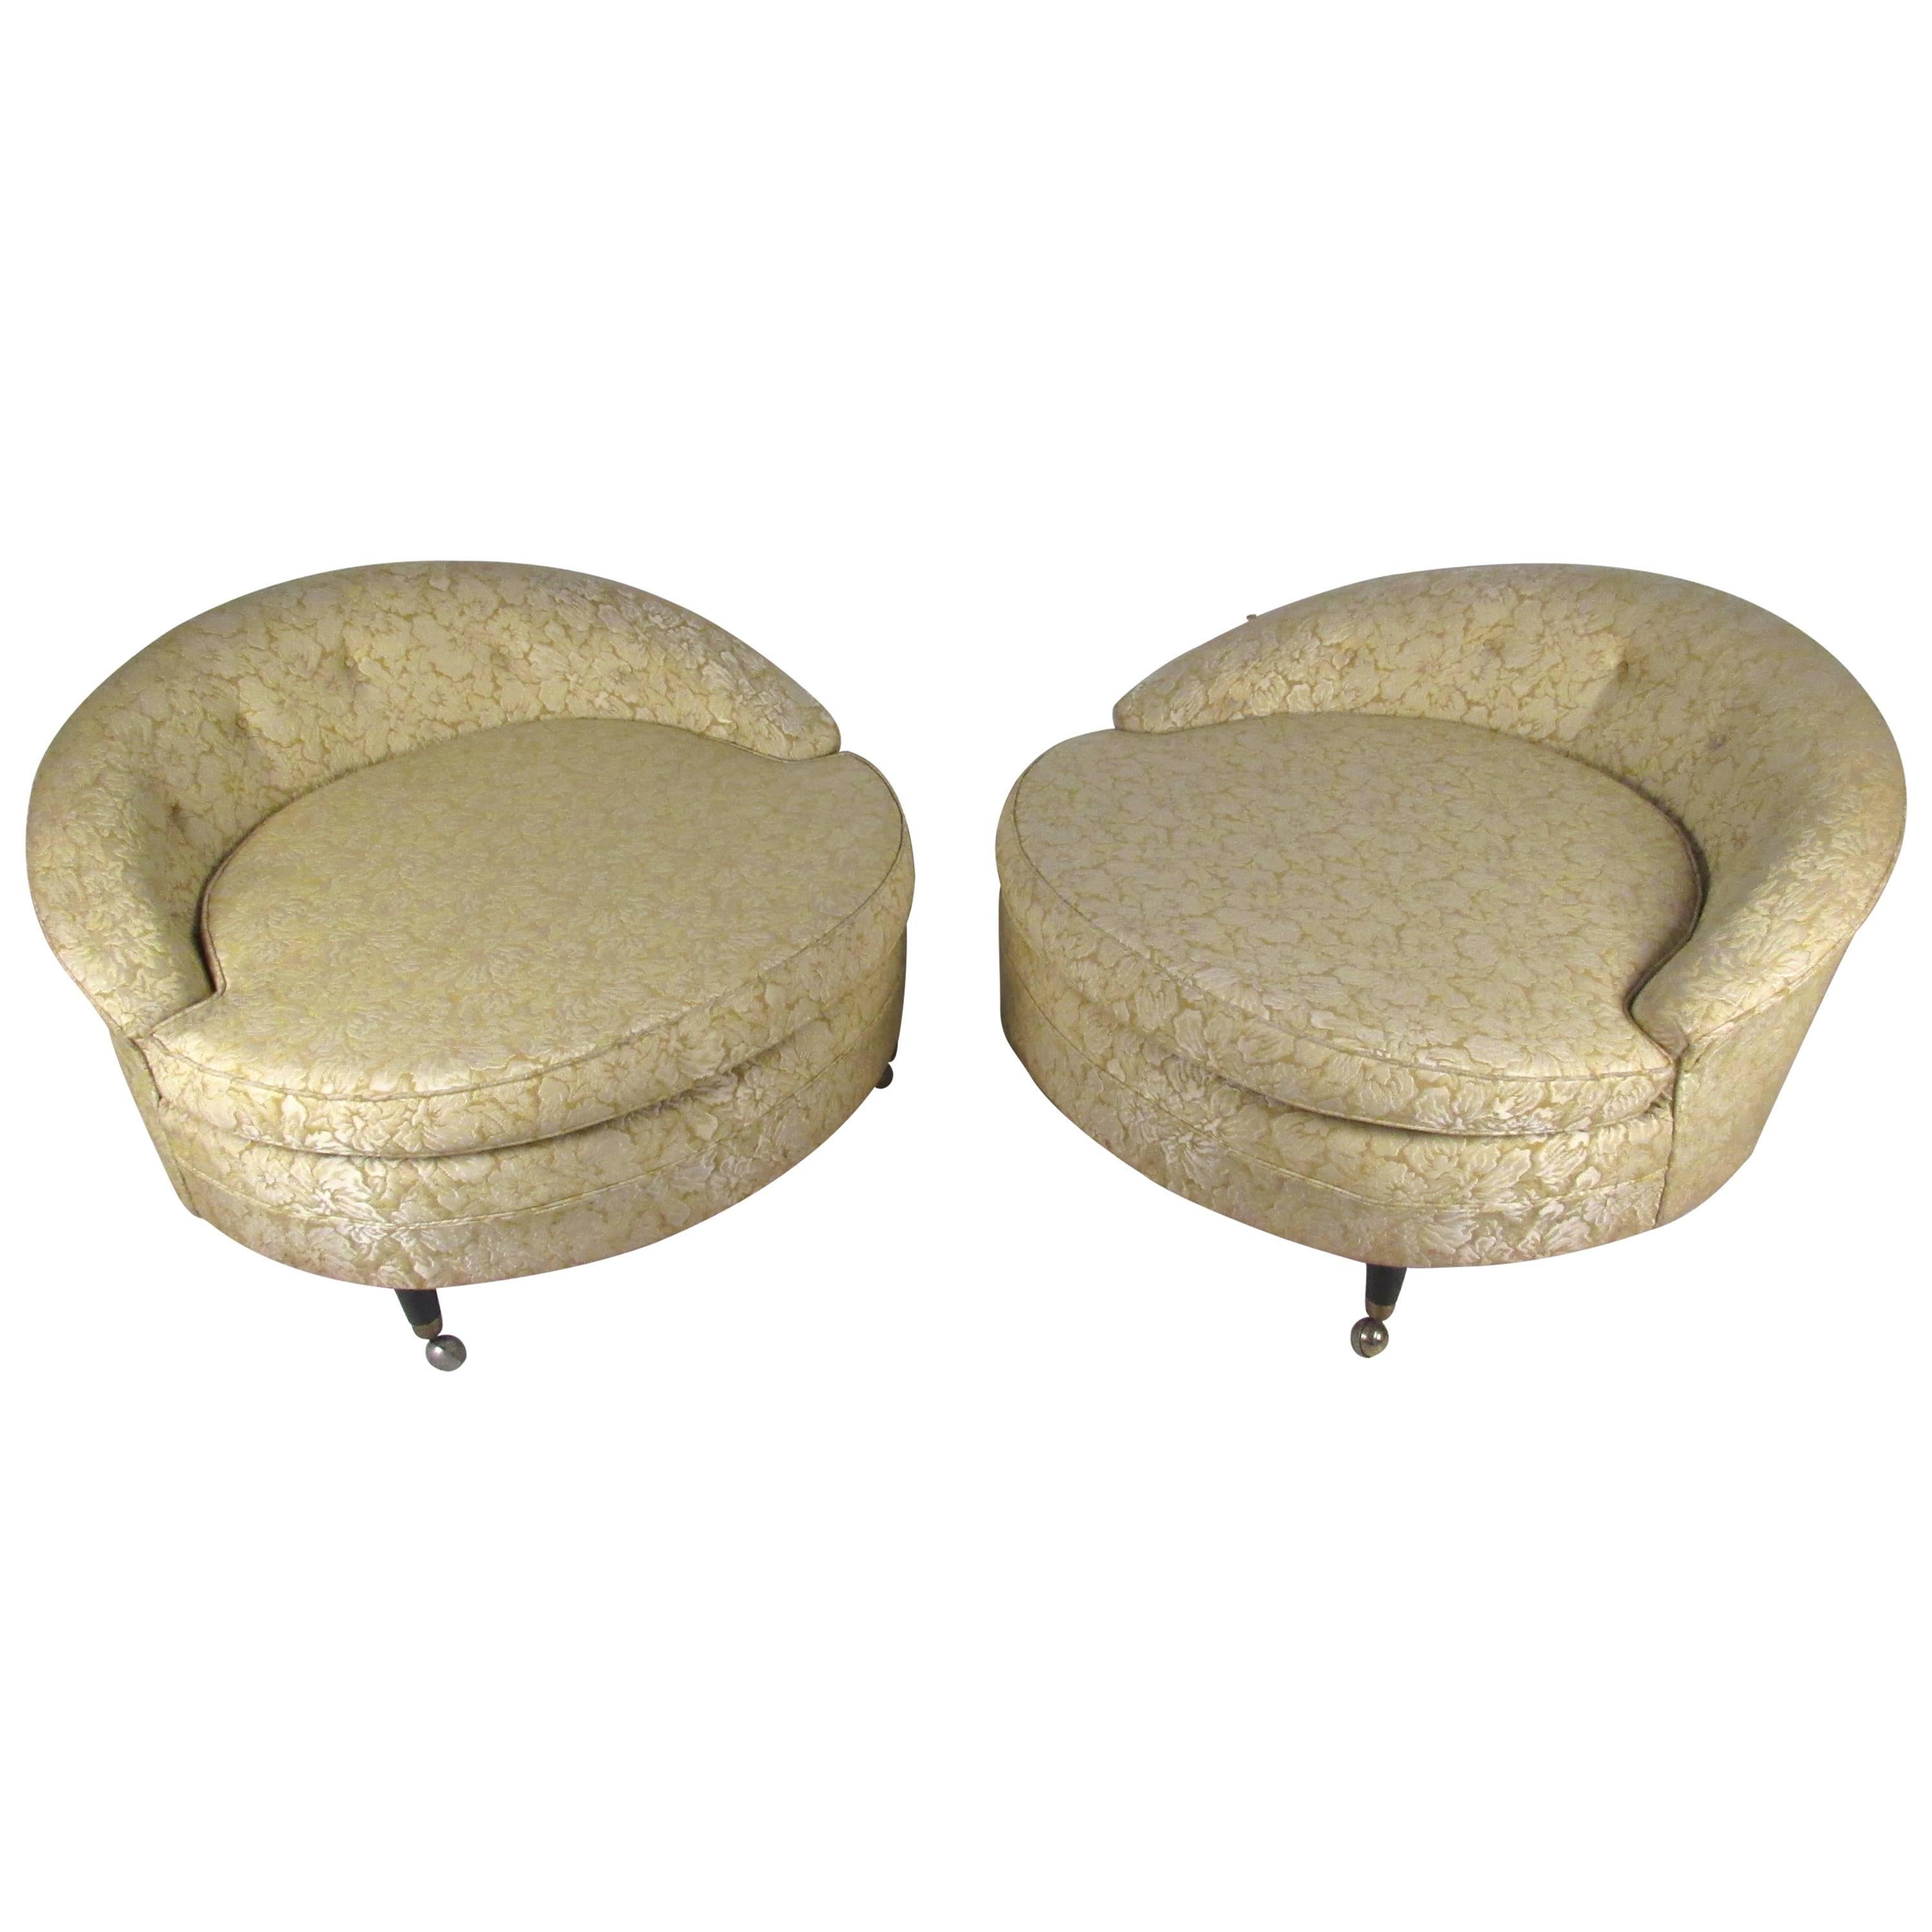 Pair of Midcentury Adrian Pearsall Style Circle Lounge Chairs